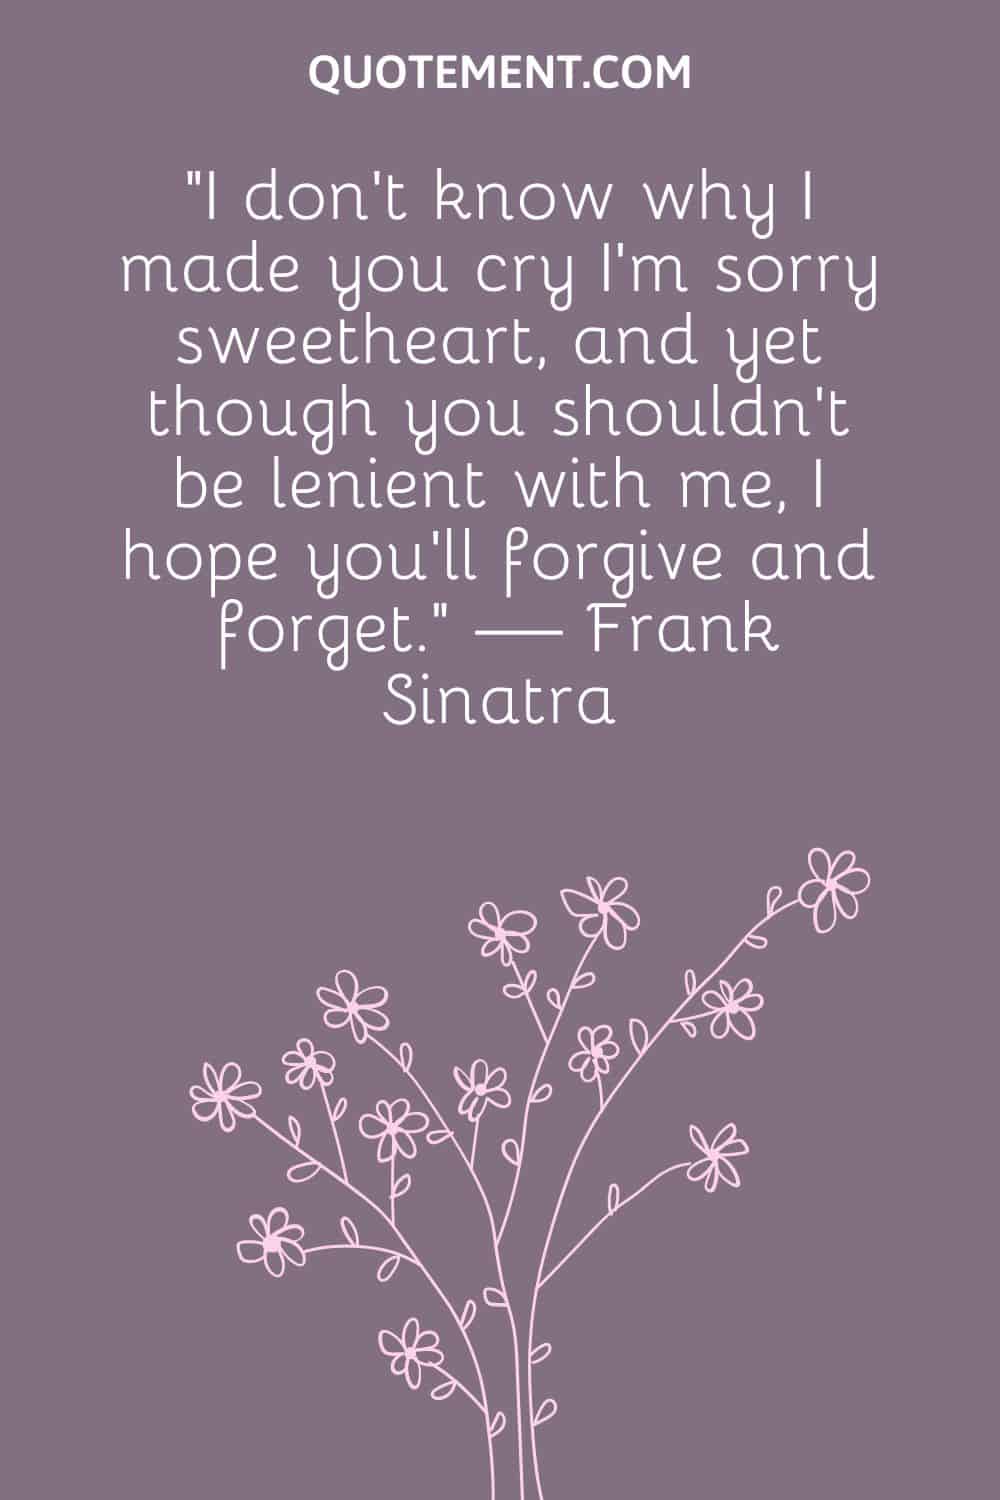 “I don’t know why I made you cry I’m sorry sweetheart, and yet though you shouldn’t be lenient with me, I hope you’ll forgive and forget.” — Frank Sinatra